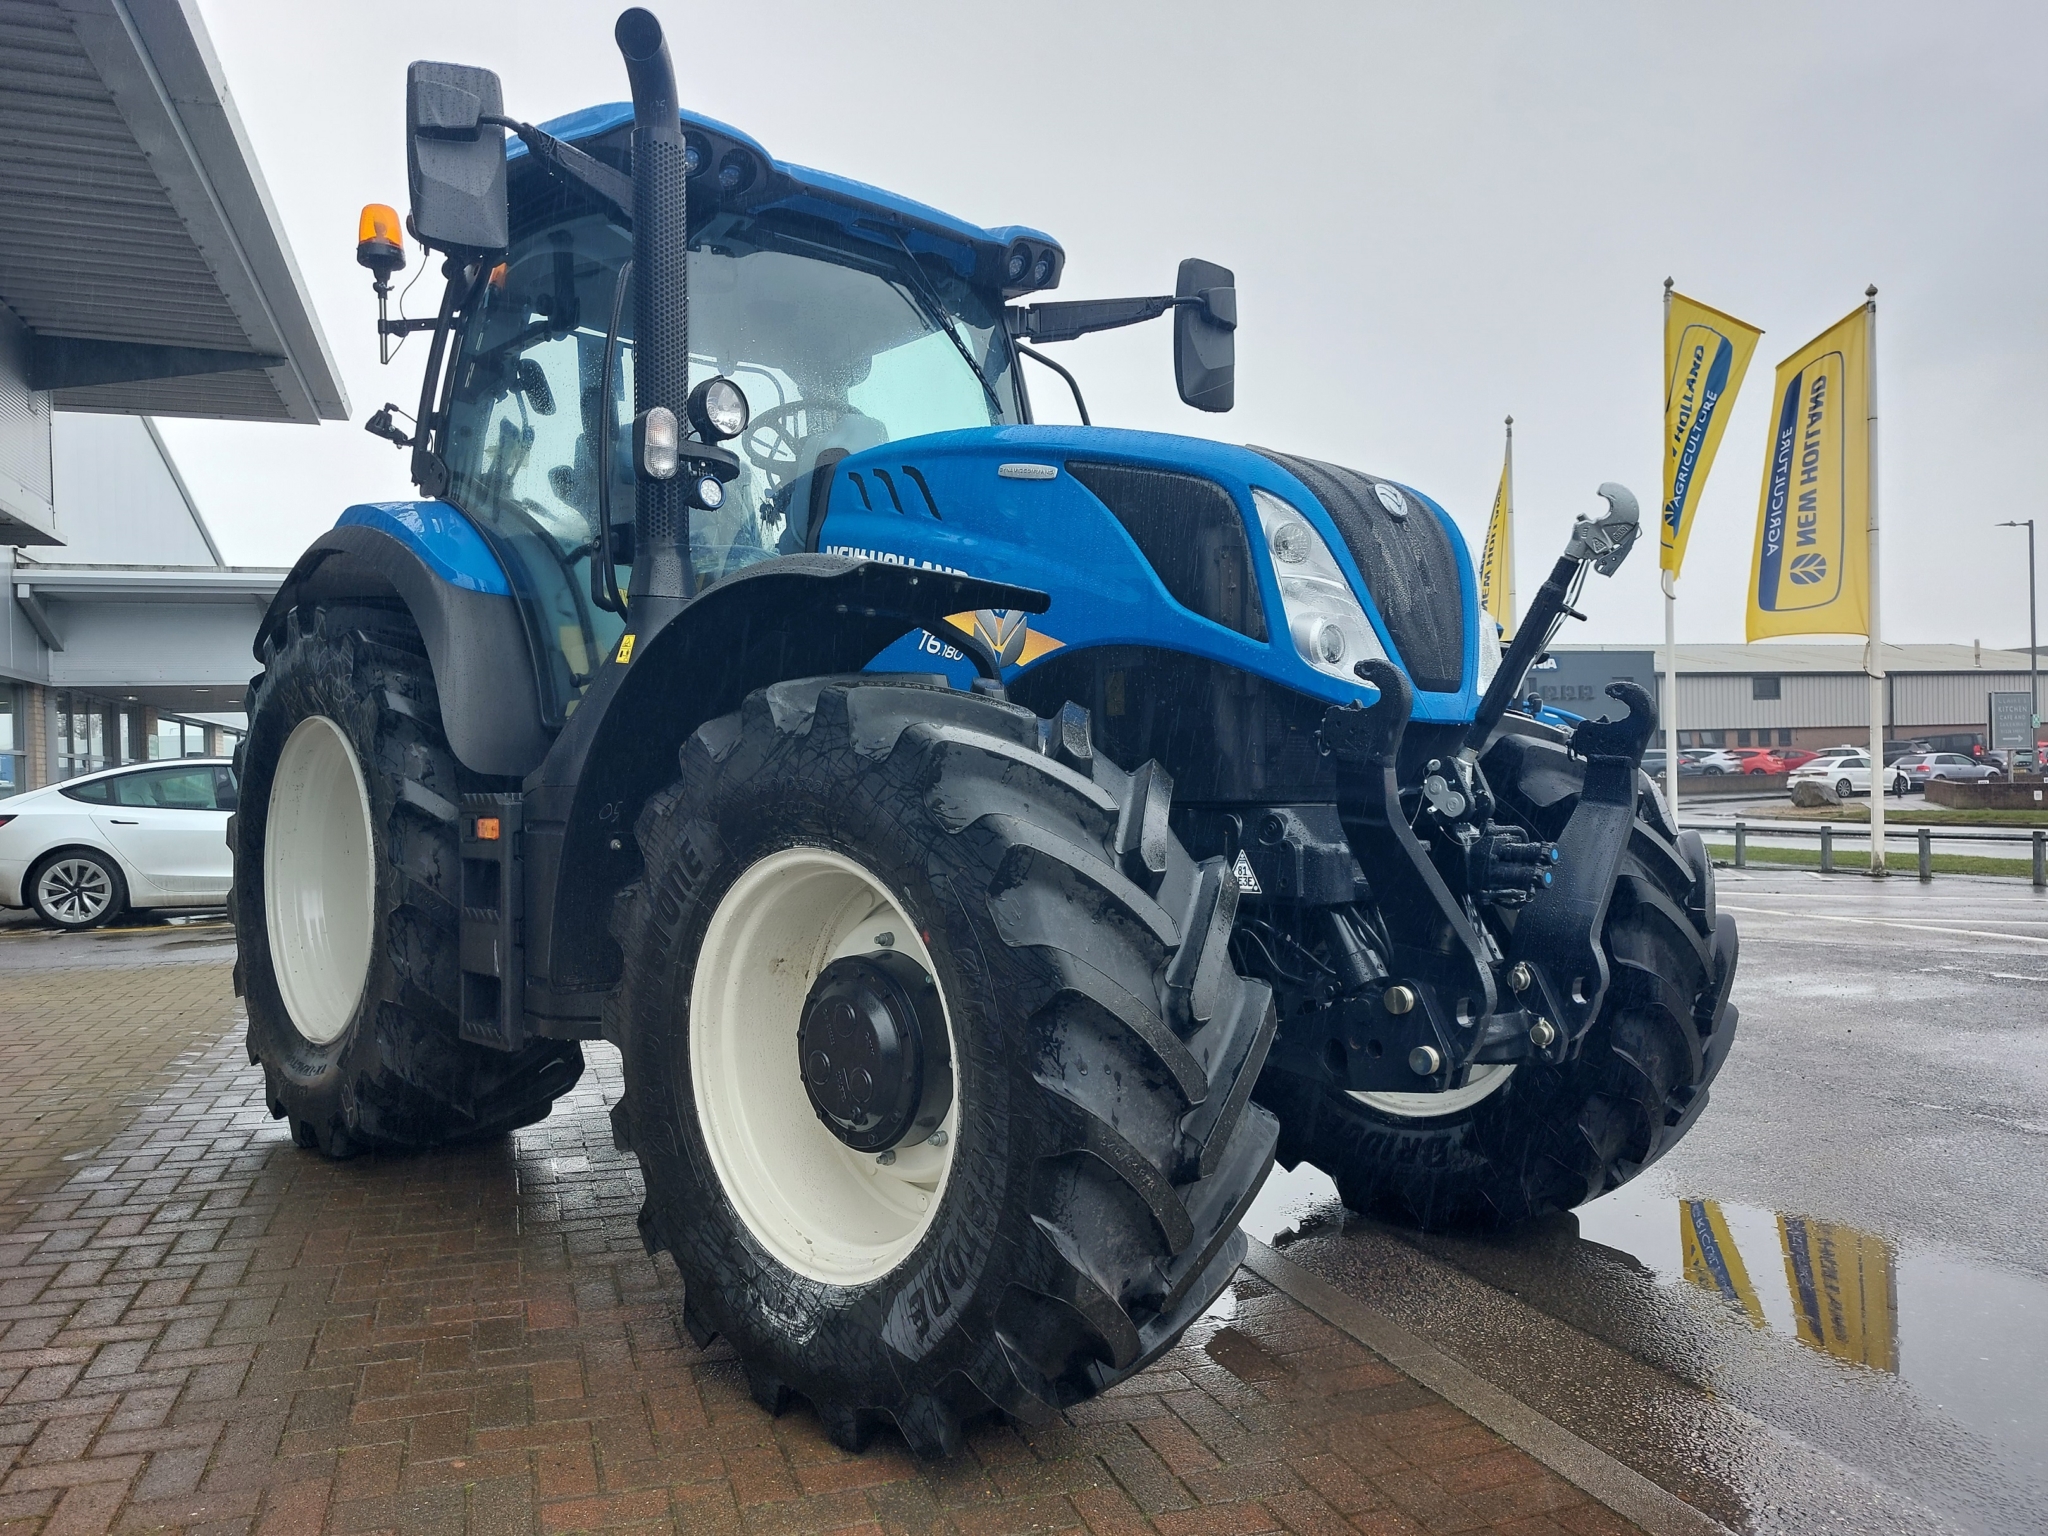 Bridgestone supplies agricultural tyres to New Holland